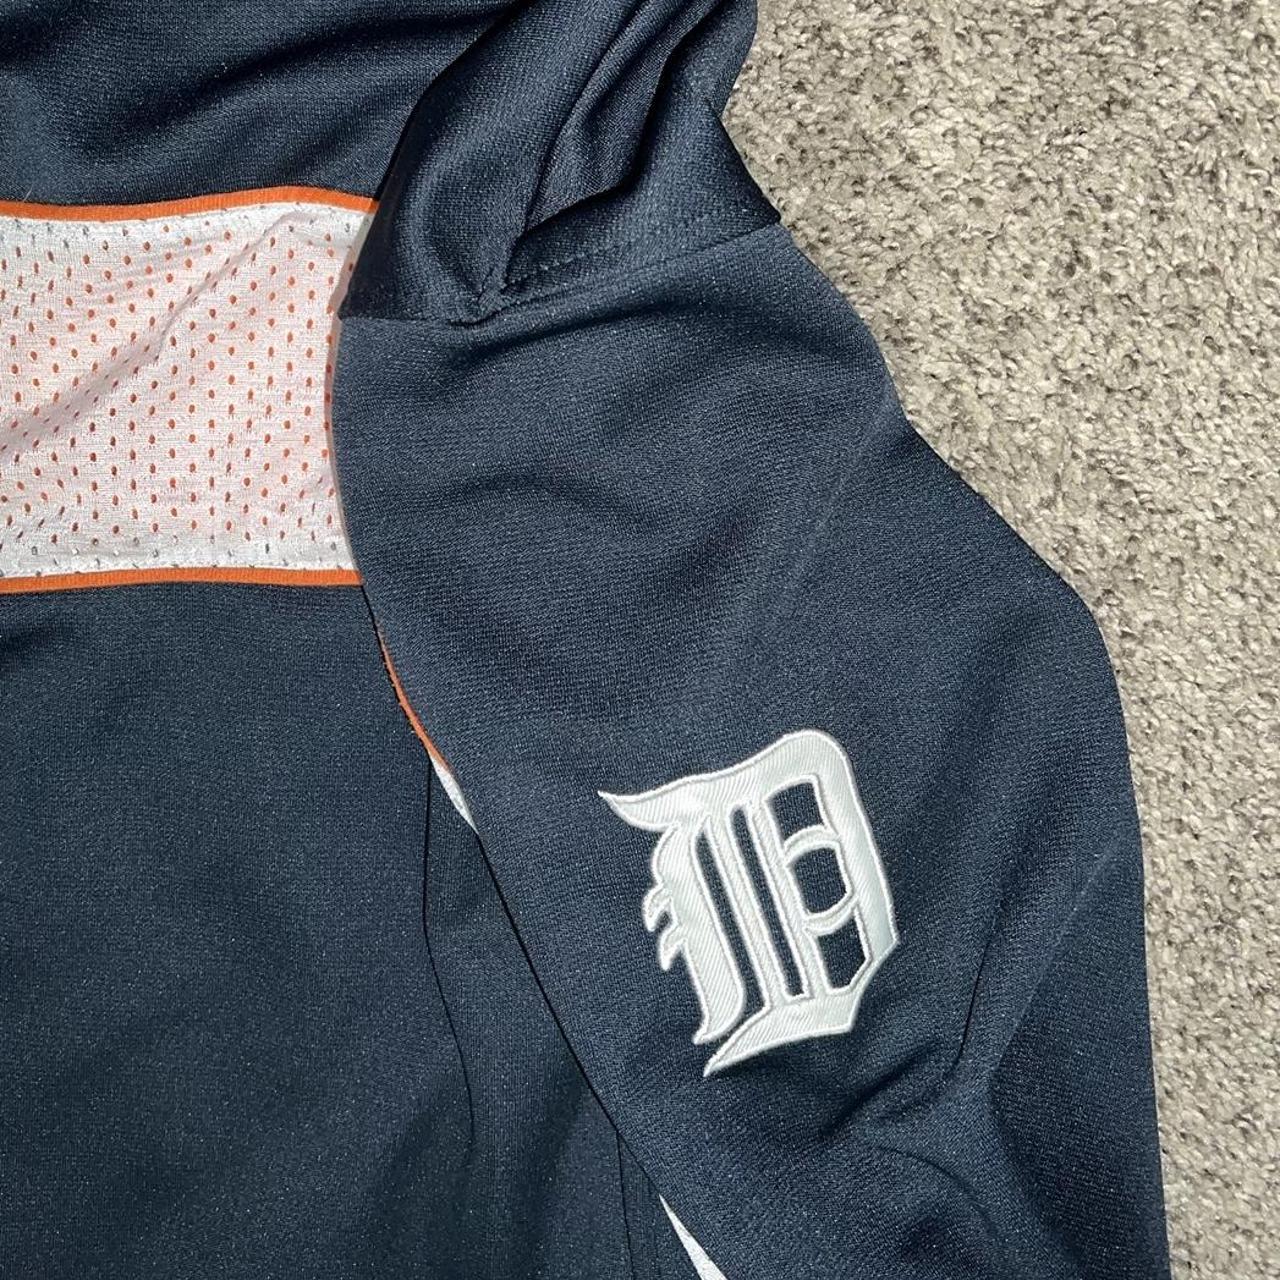 Detroit Tigers zip up hoodie. Made by Stitches - Depop